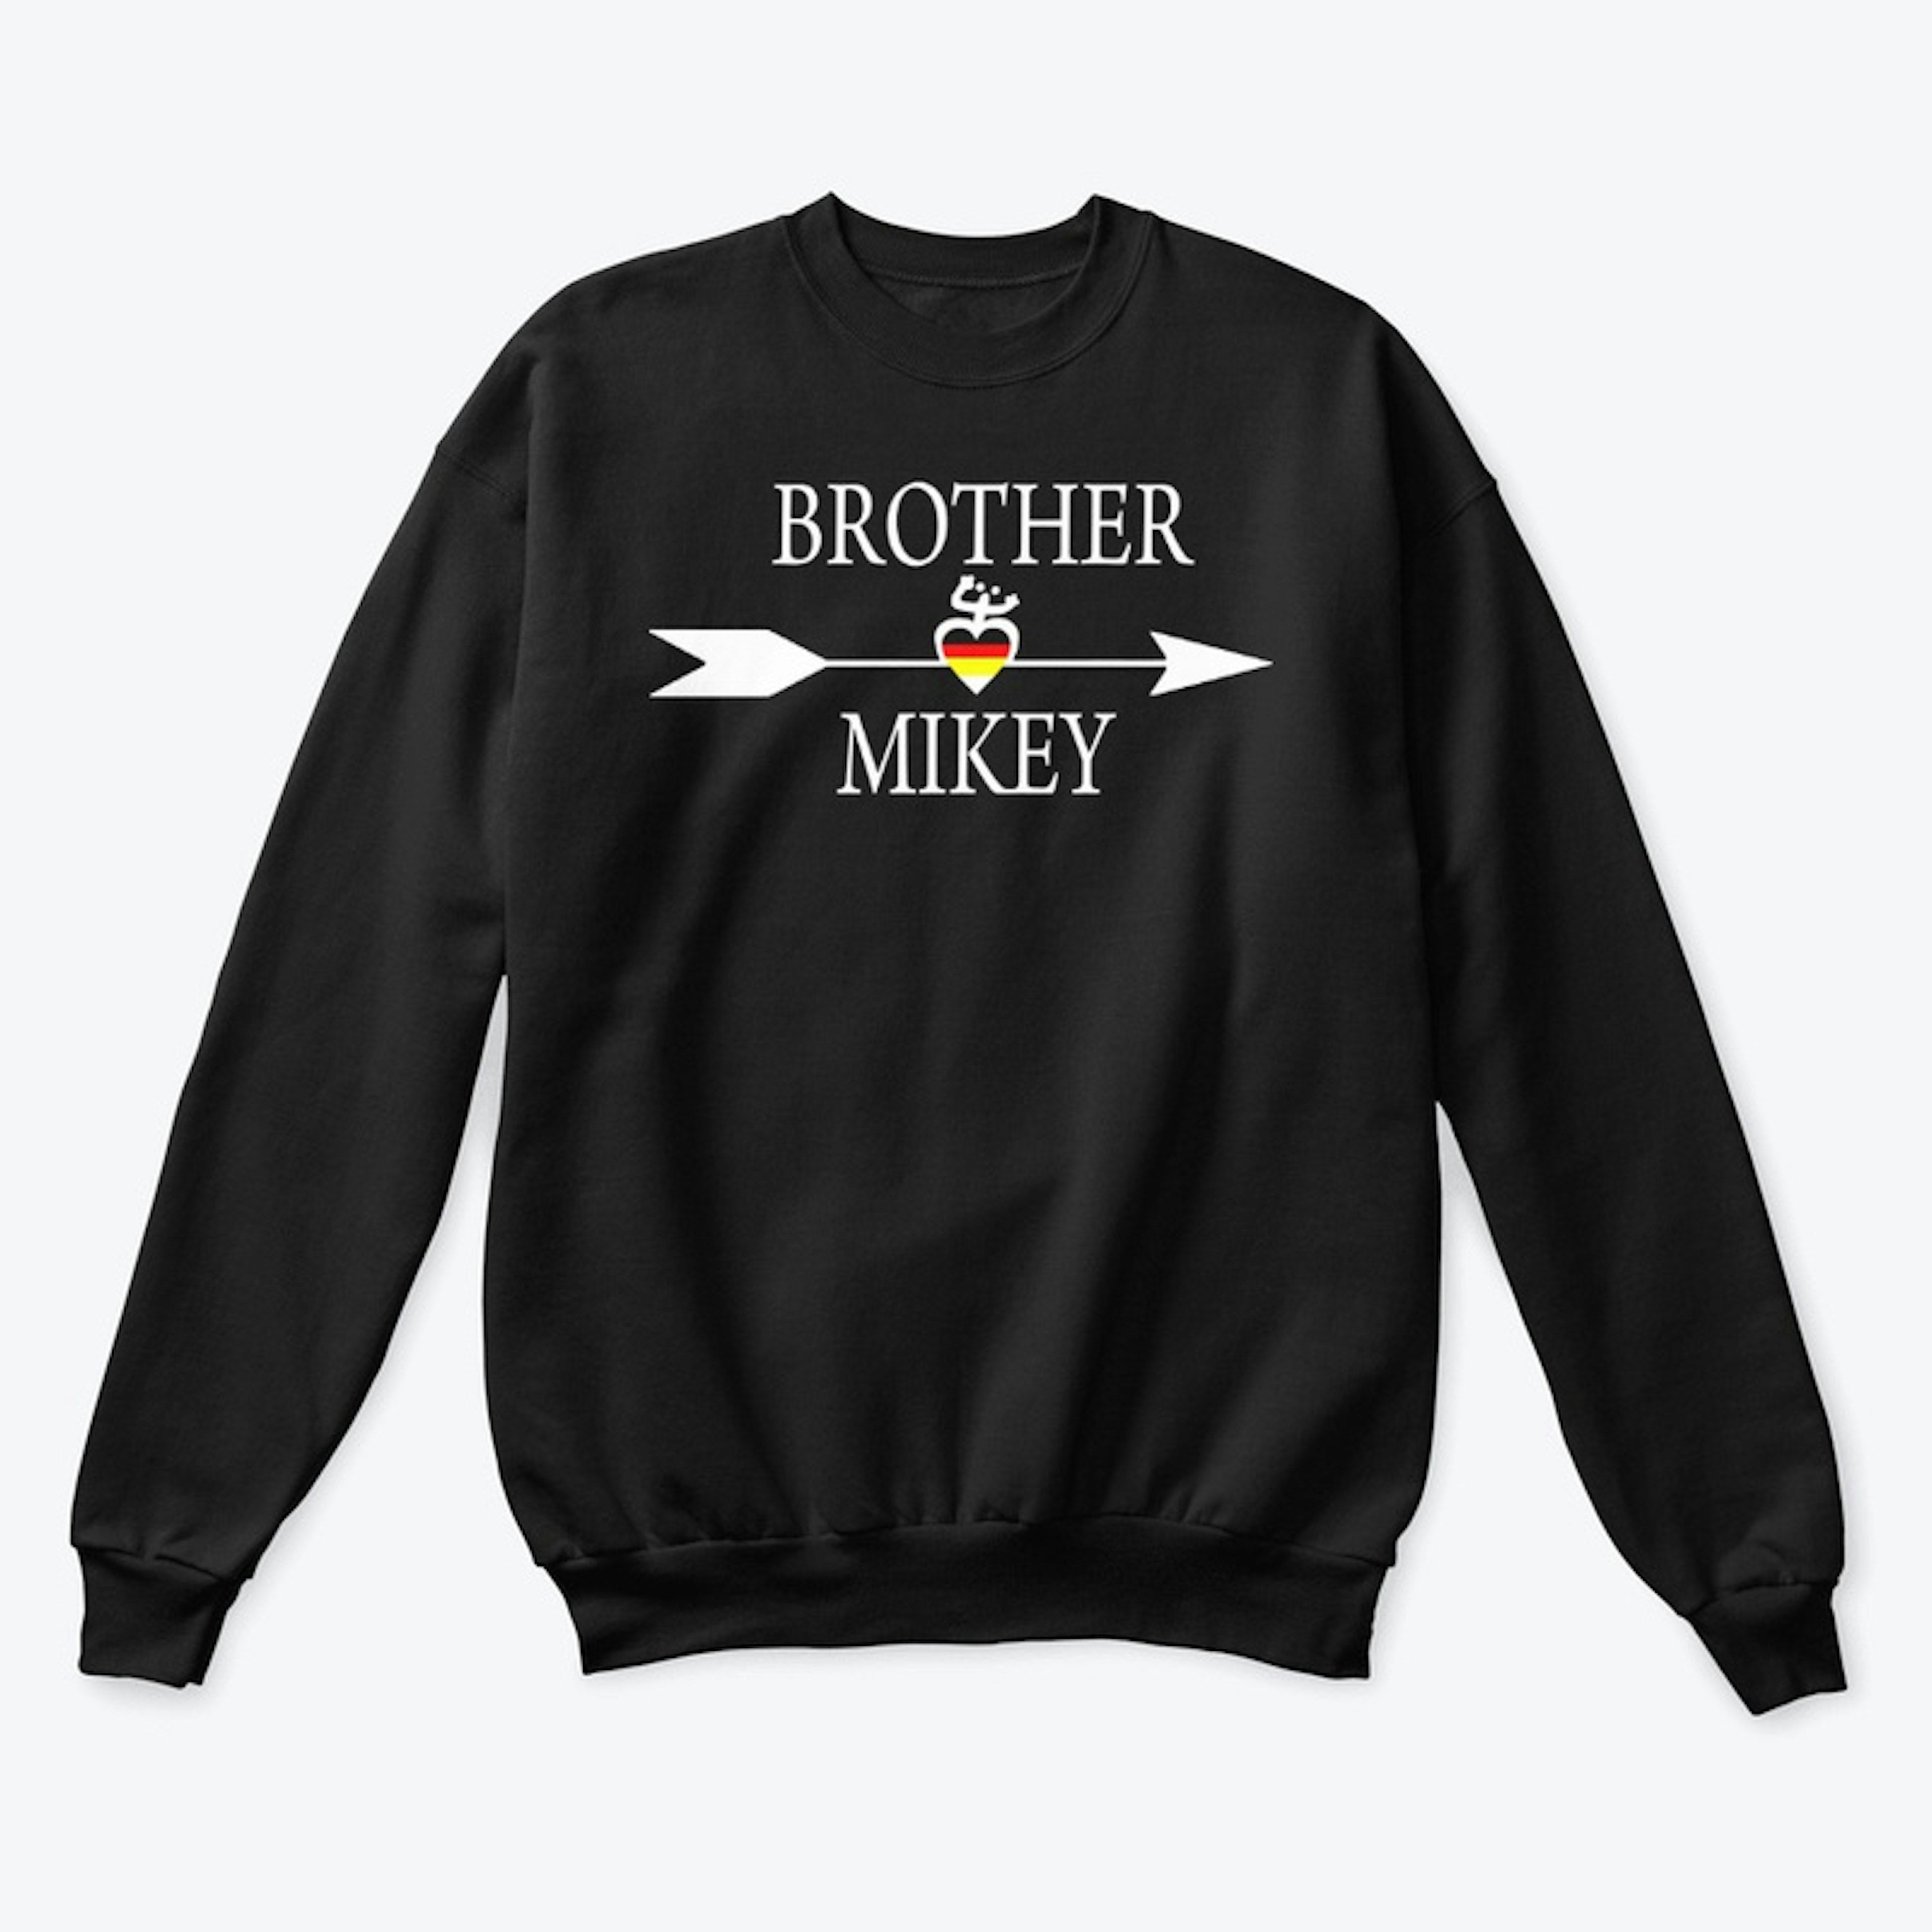 Brother Mikey Logo